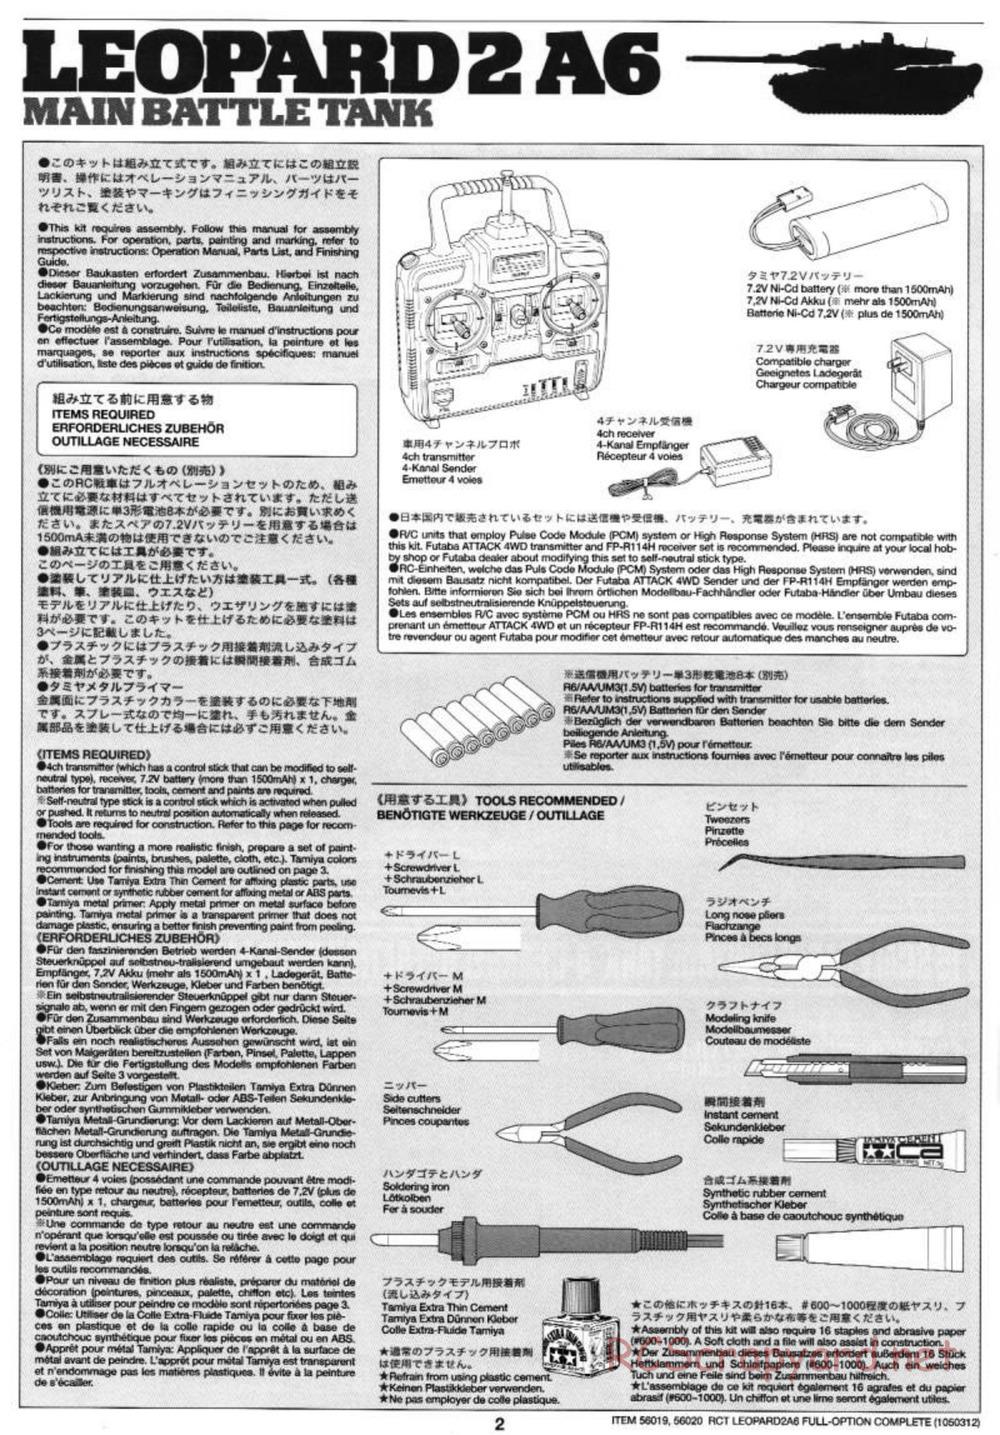 Tamiya - Leopard 2 A6 - 1/16 Scale Chassis - Manual - Page 2